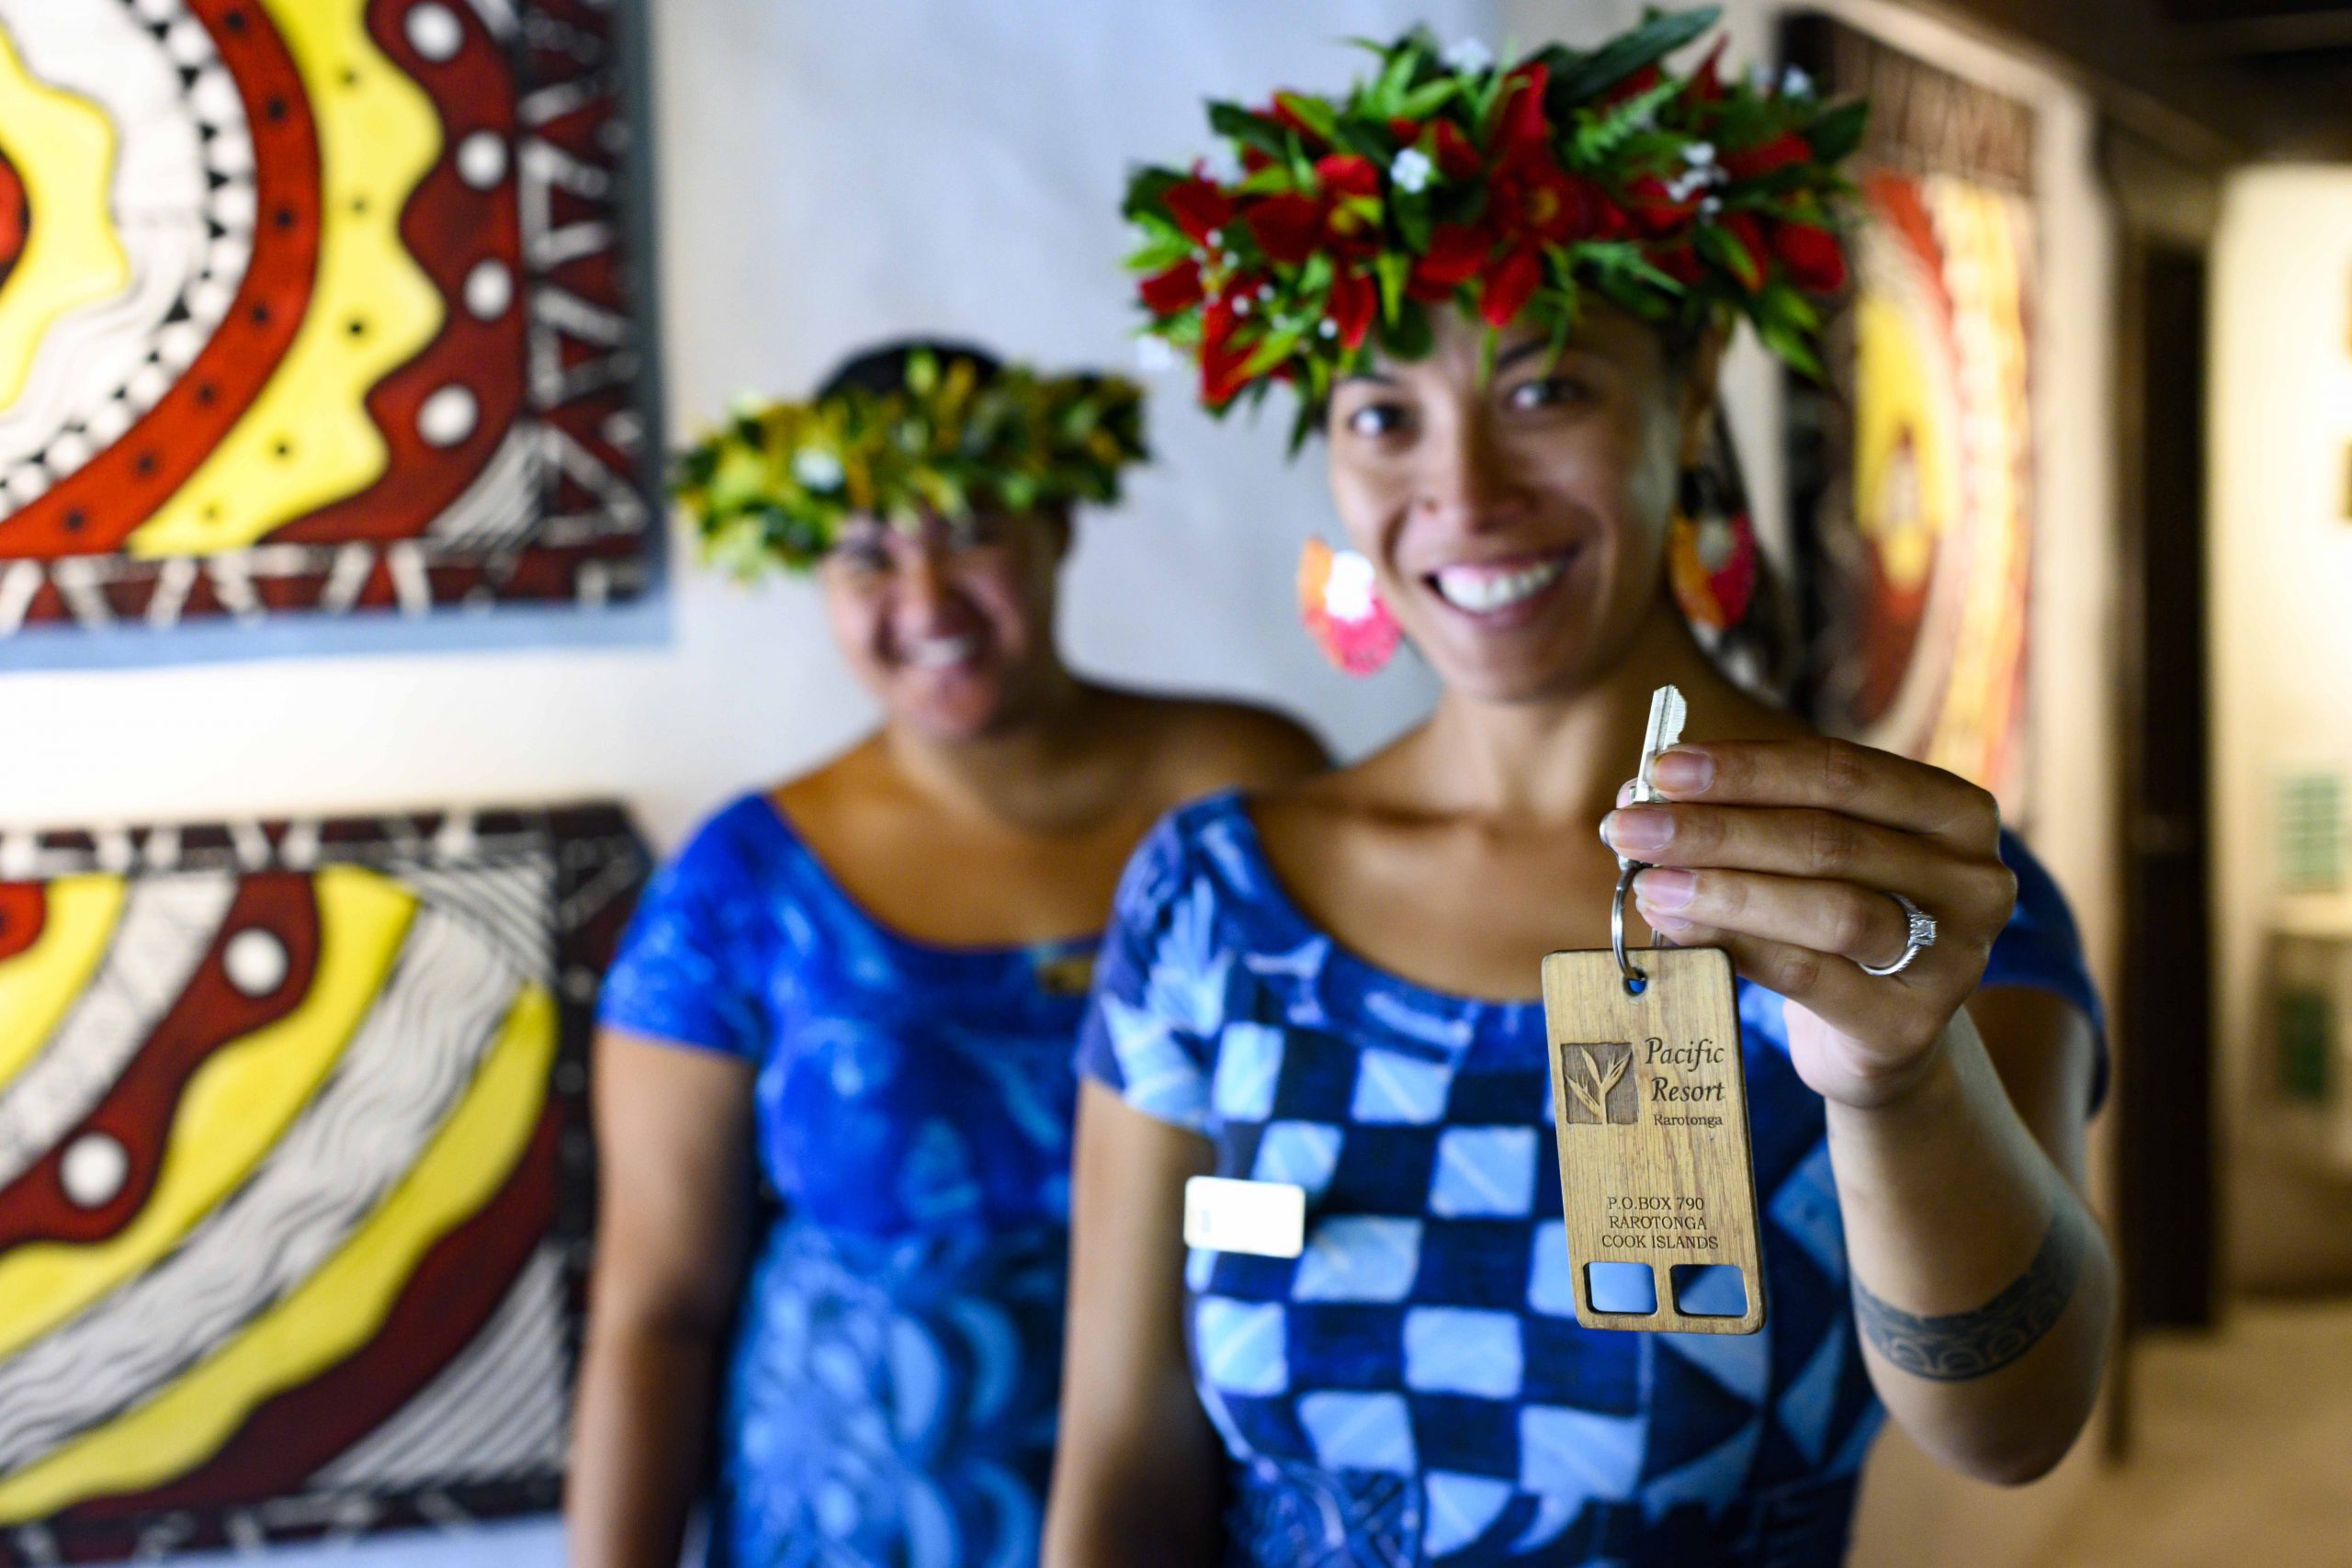 image of the Pacific Resort room key modelled by two beautiful Guest Services Agents